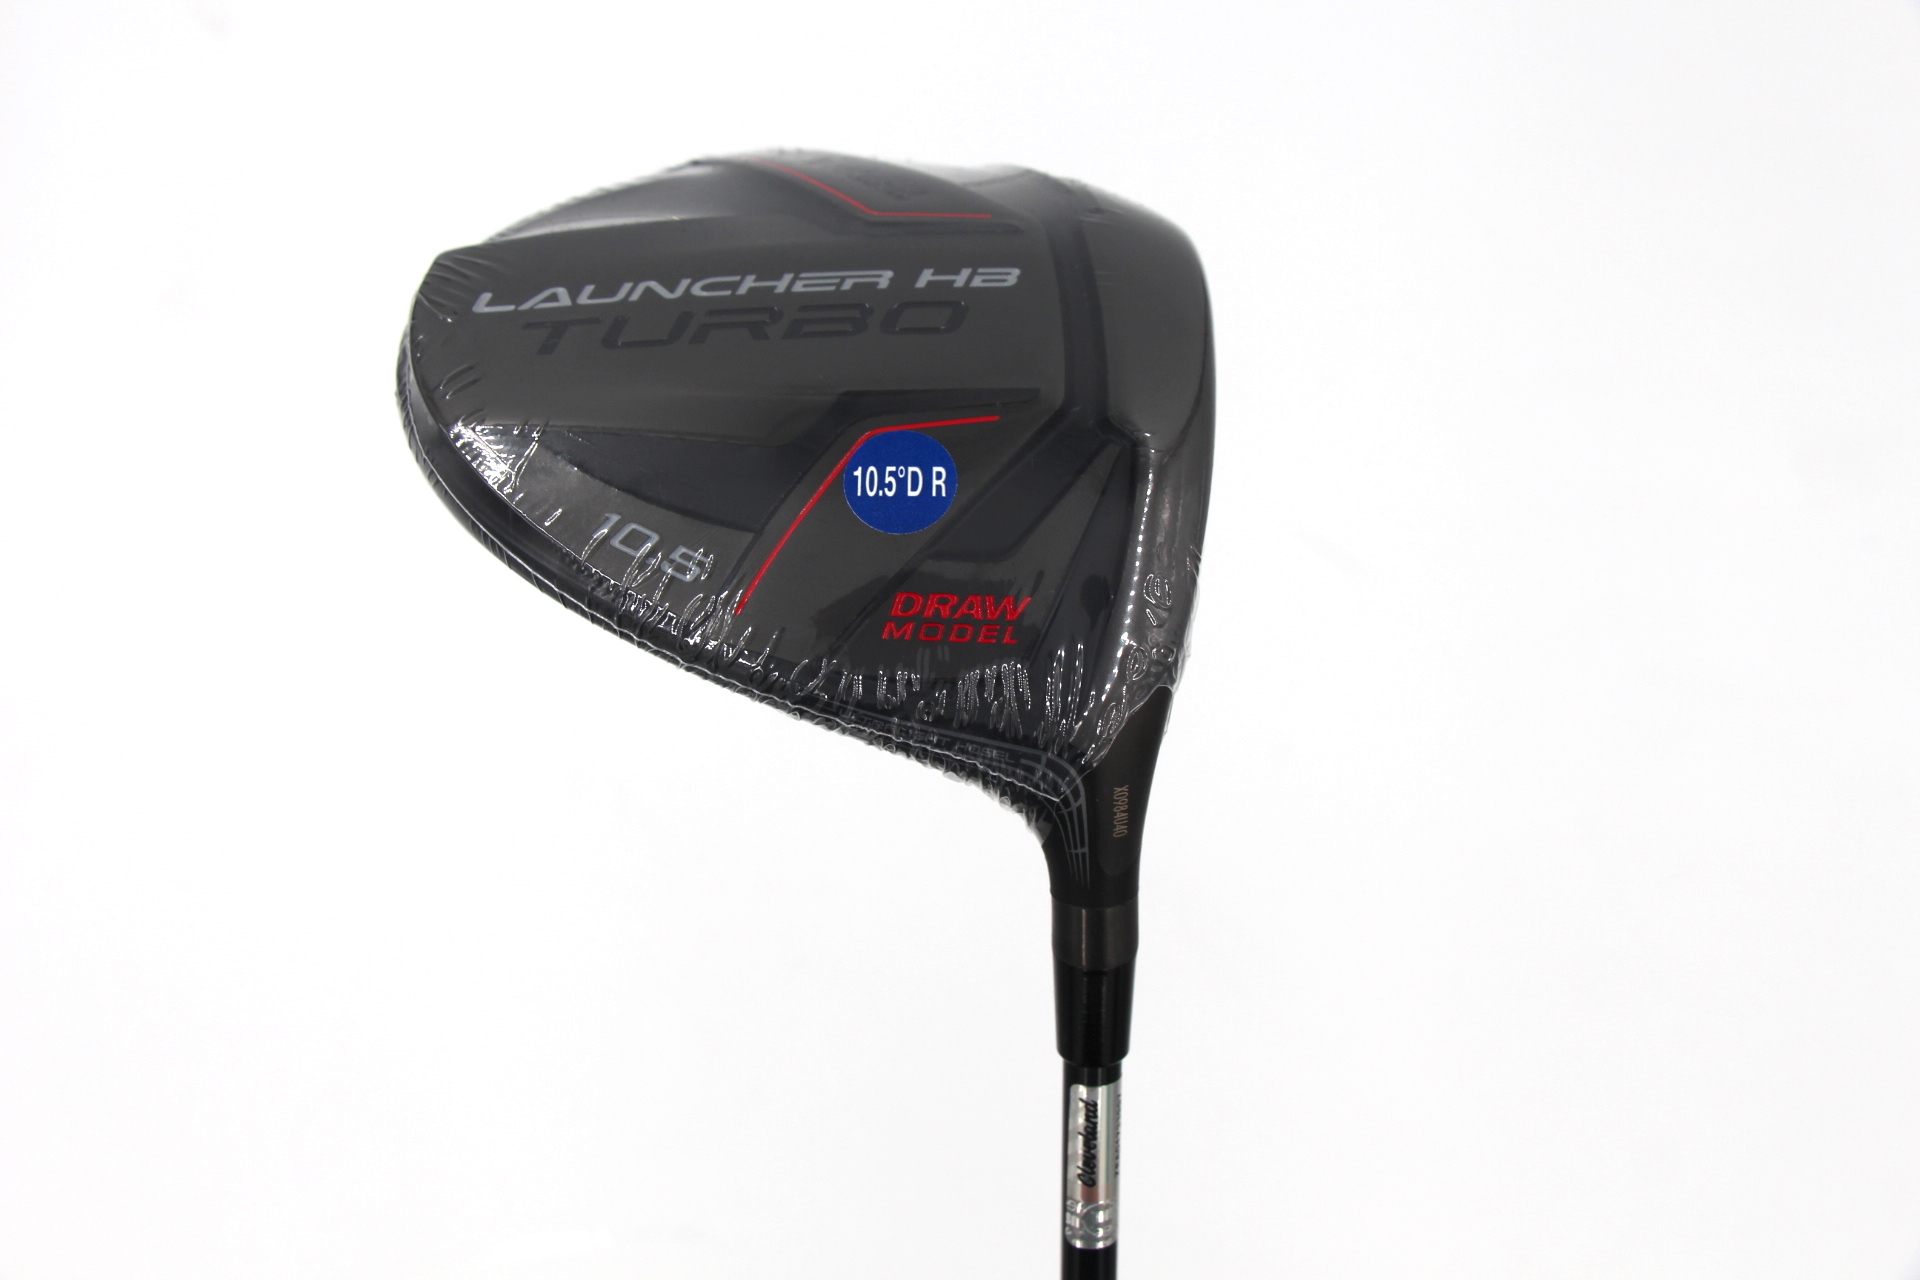 New Cleveland Launcher HB Turbo Draw Driver